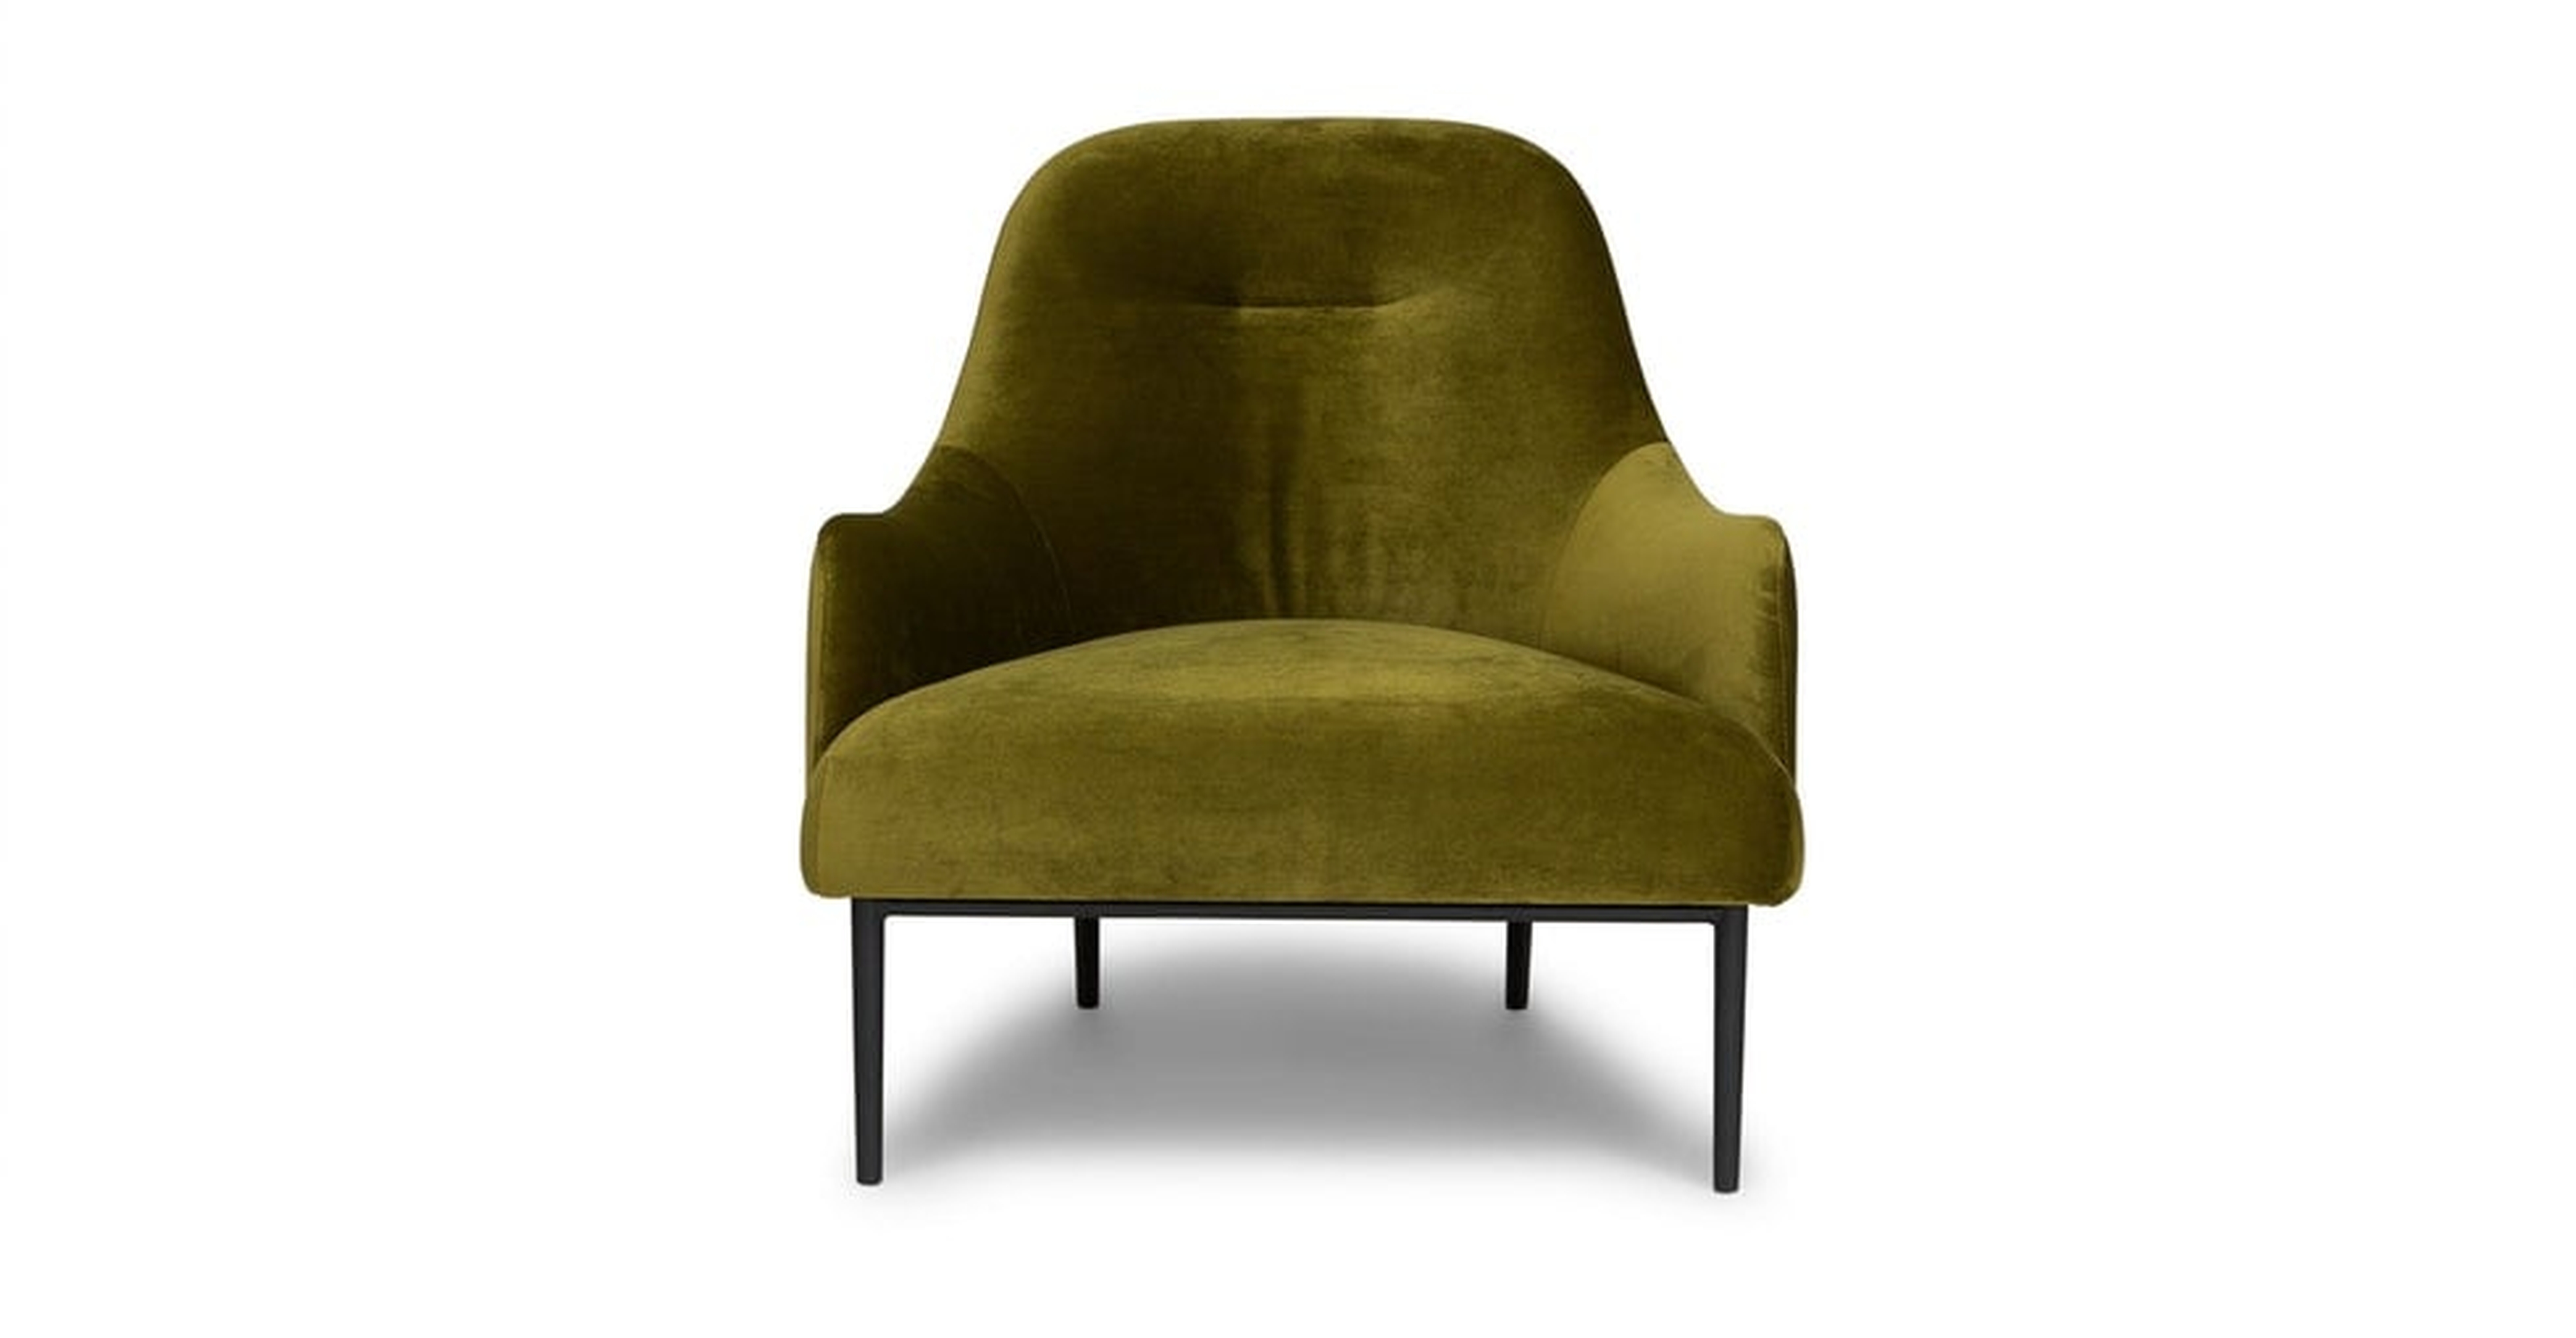 Embrace Chair, Moss Green RESTOCK in Late January 2023 - Article